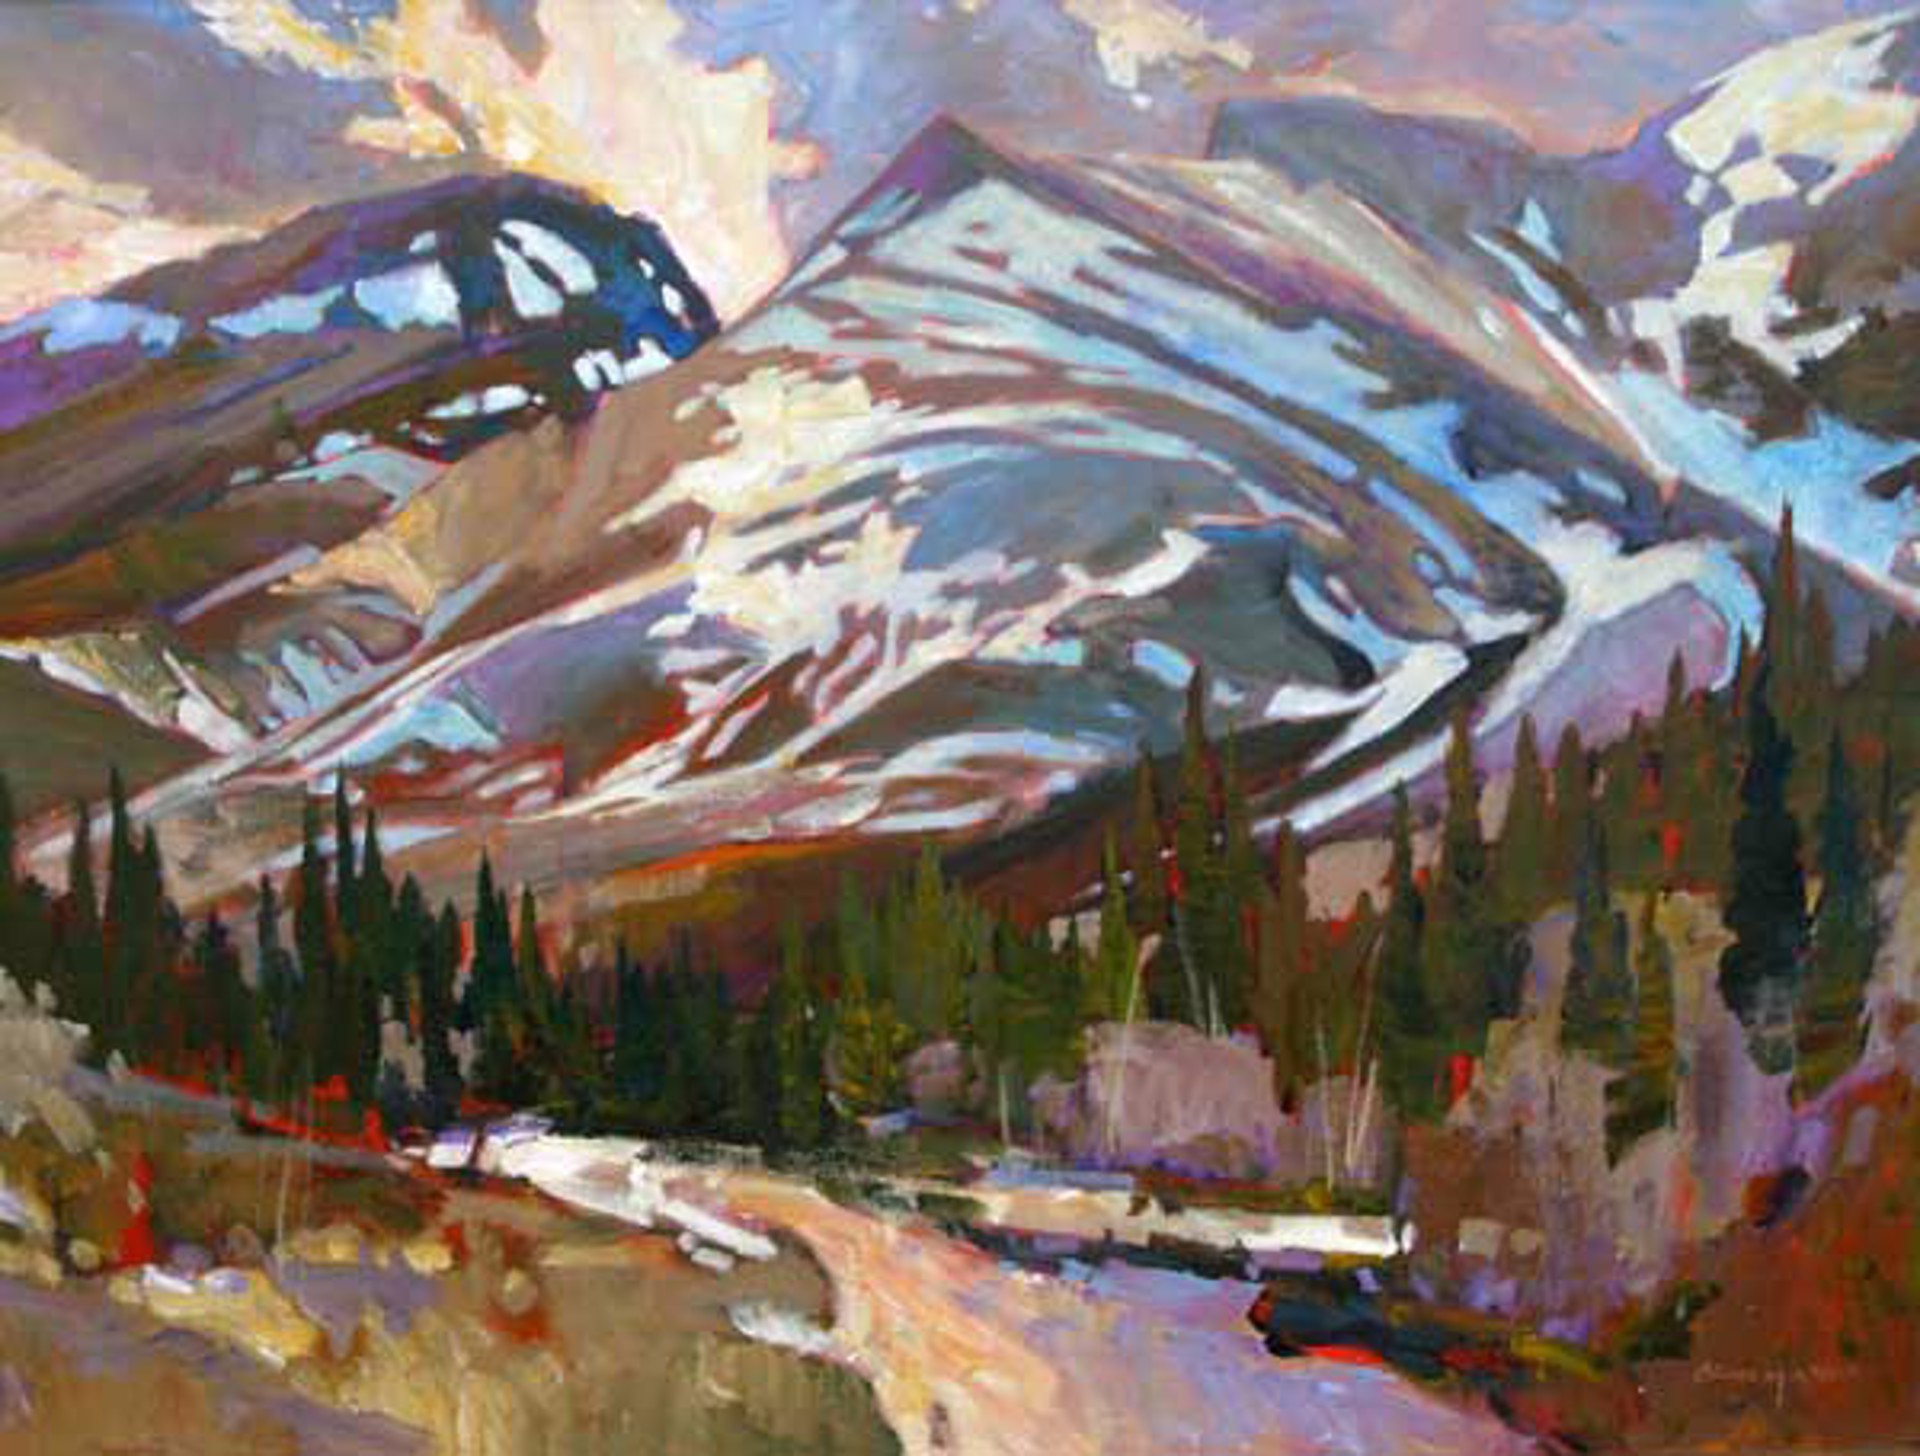 Spring Rhythms - Rockies by Brian and Peggy Atyeo